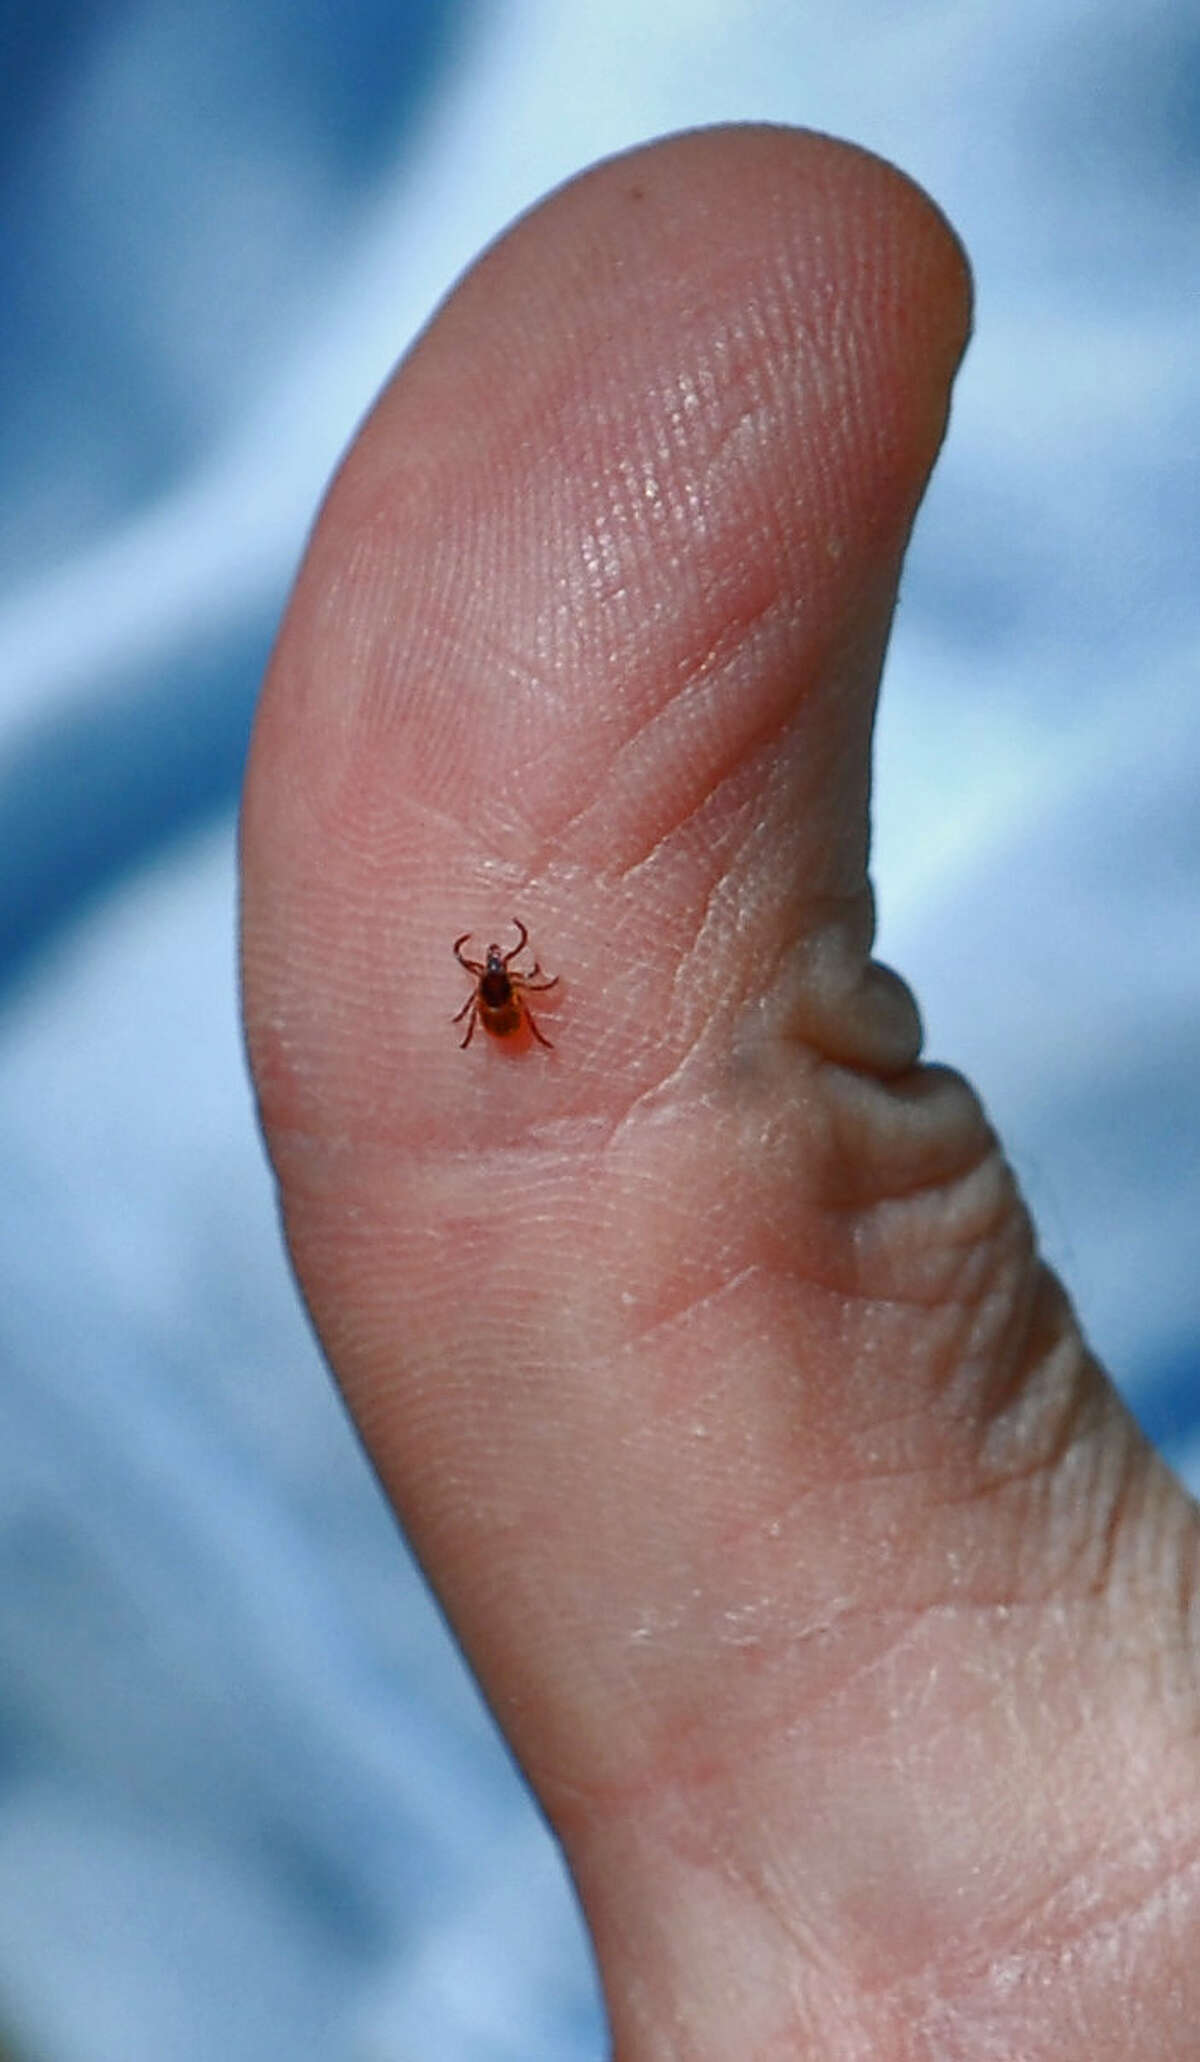 A male deer tick caught using a tick drag in a field in Ghent, NY Monday May 14, 2007. (Philip Kamrass / Times Union archive)